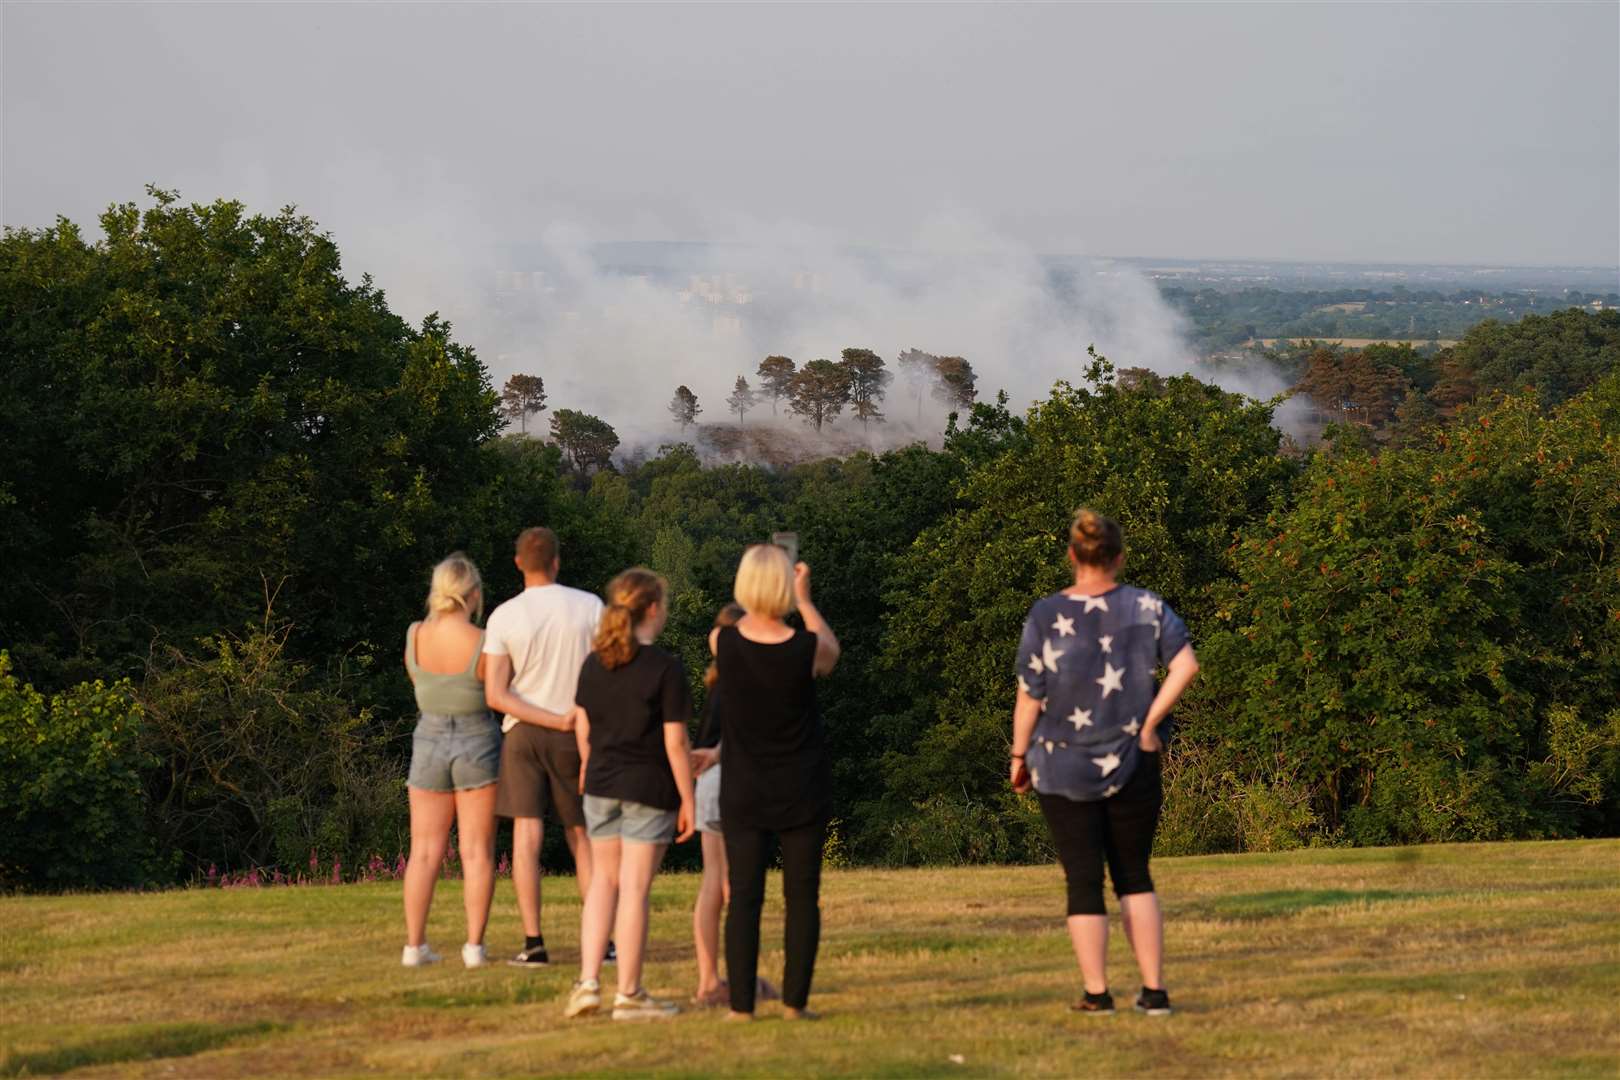 People watch a large wildfire that broke out in woodland at Lickey Hills Country Park on the edge of Birmingham (Jacob King/PA)